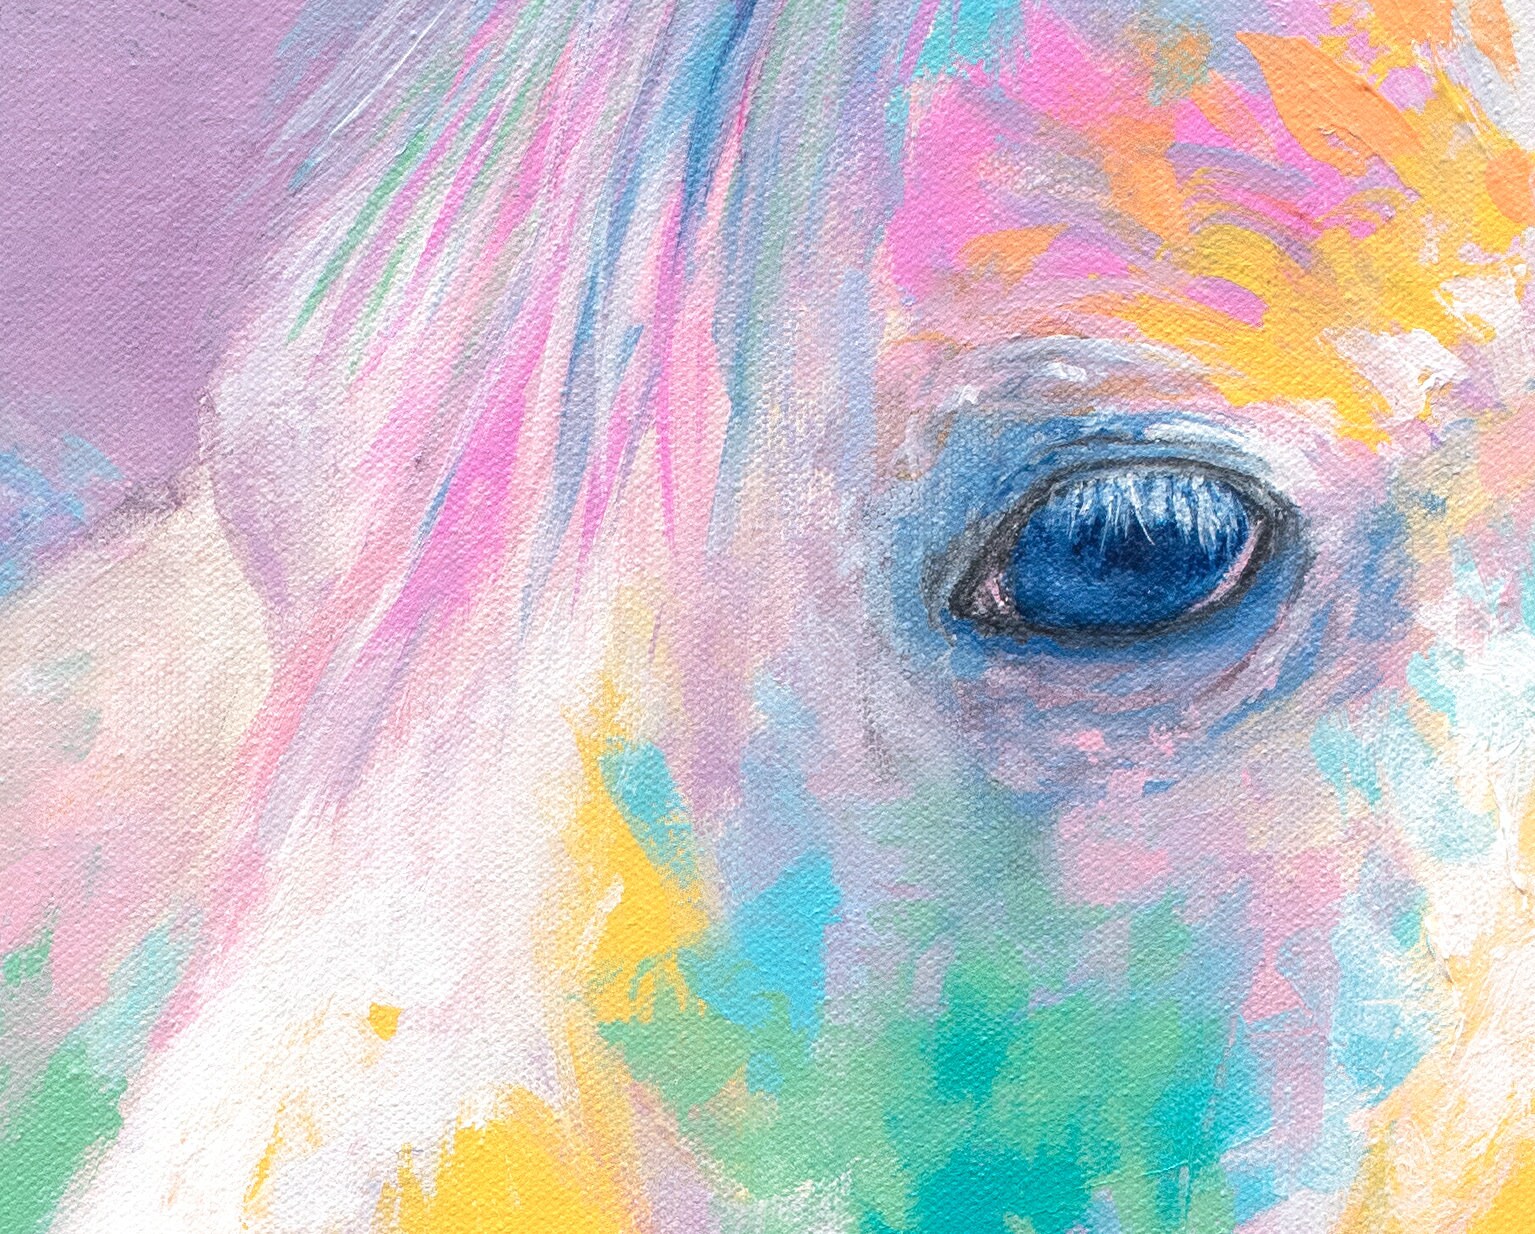 Horse Art Print on CANVAS or PAPER - Colorful Horse Painting by Krystle Cole